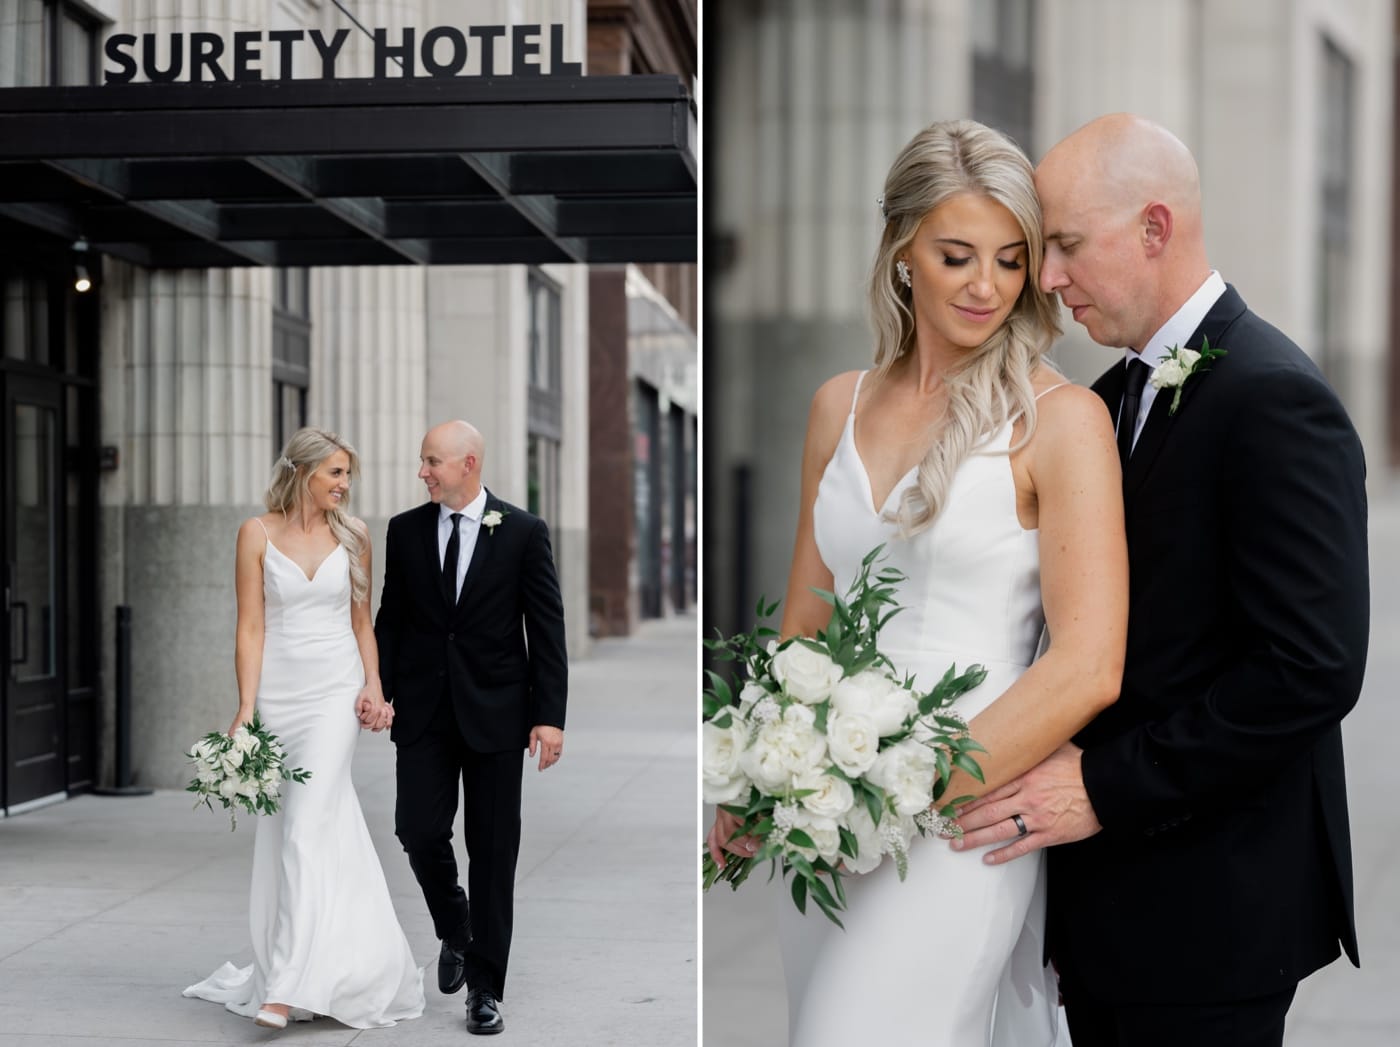 33 bride and groom portraits outside surety hotel